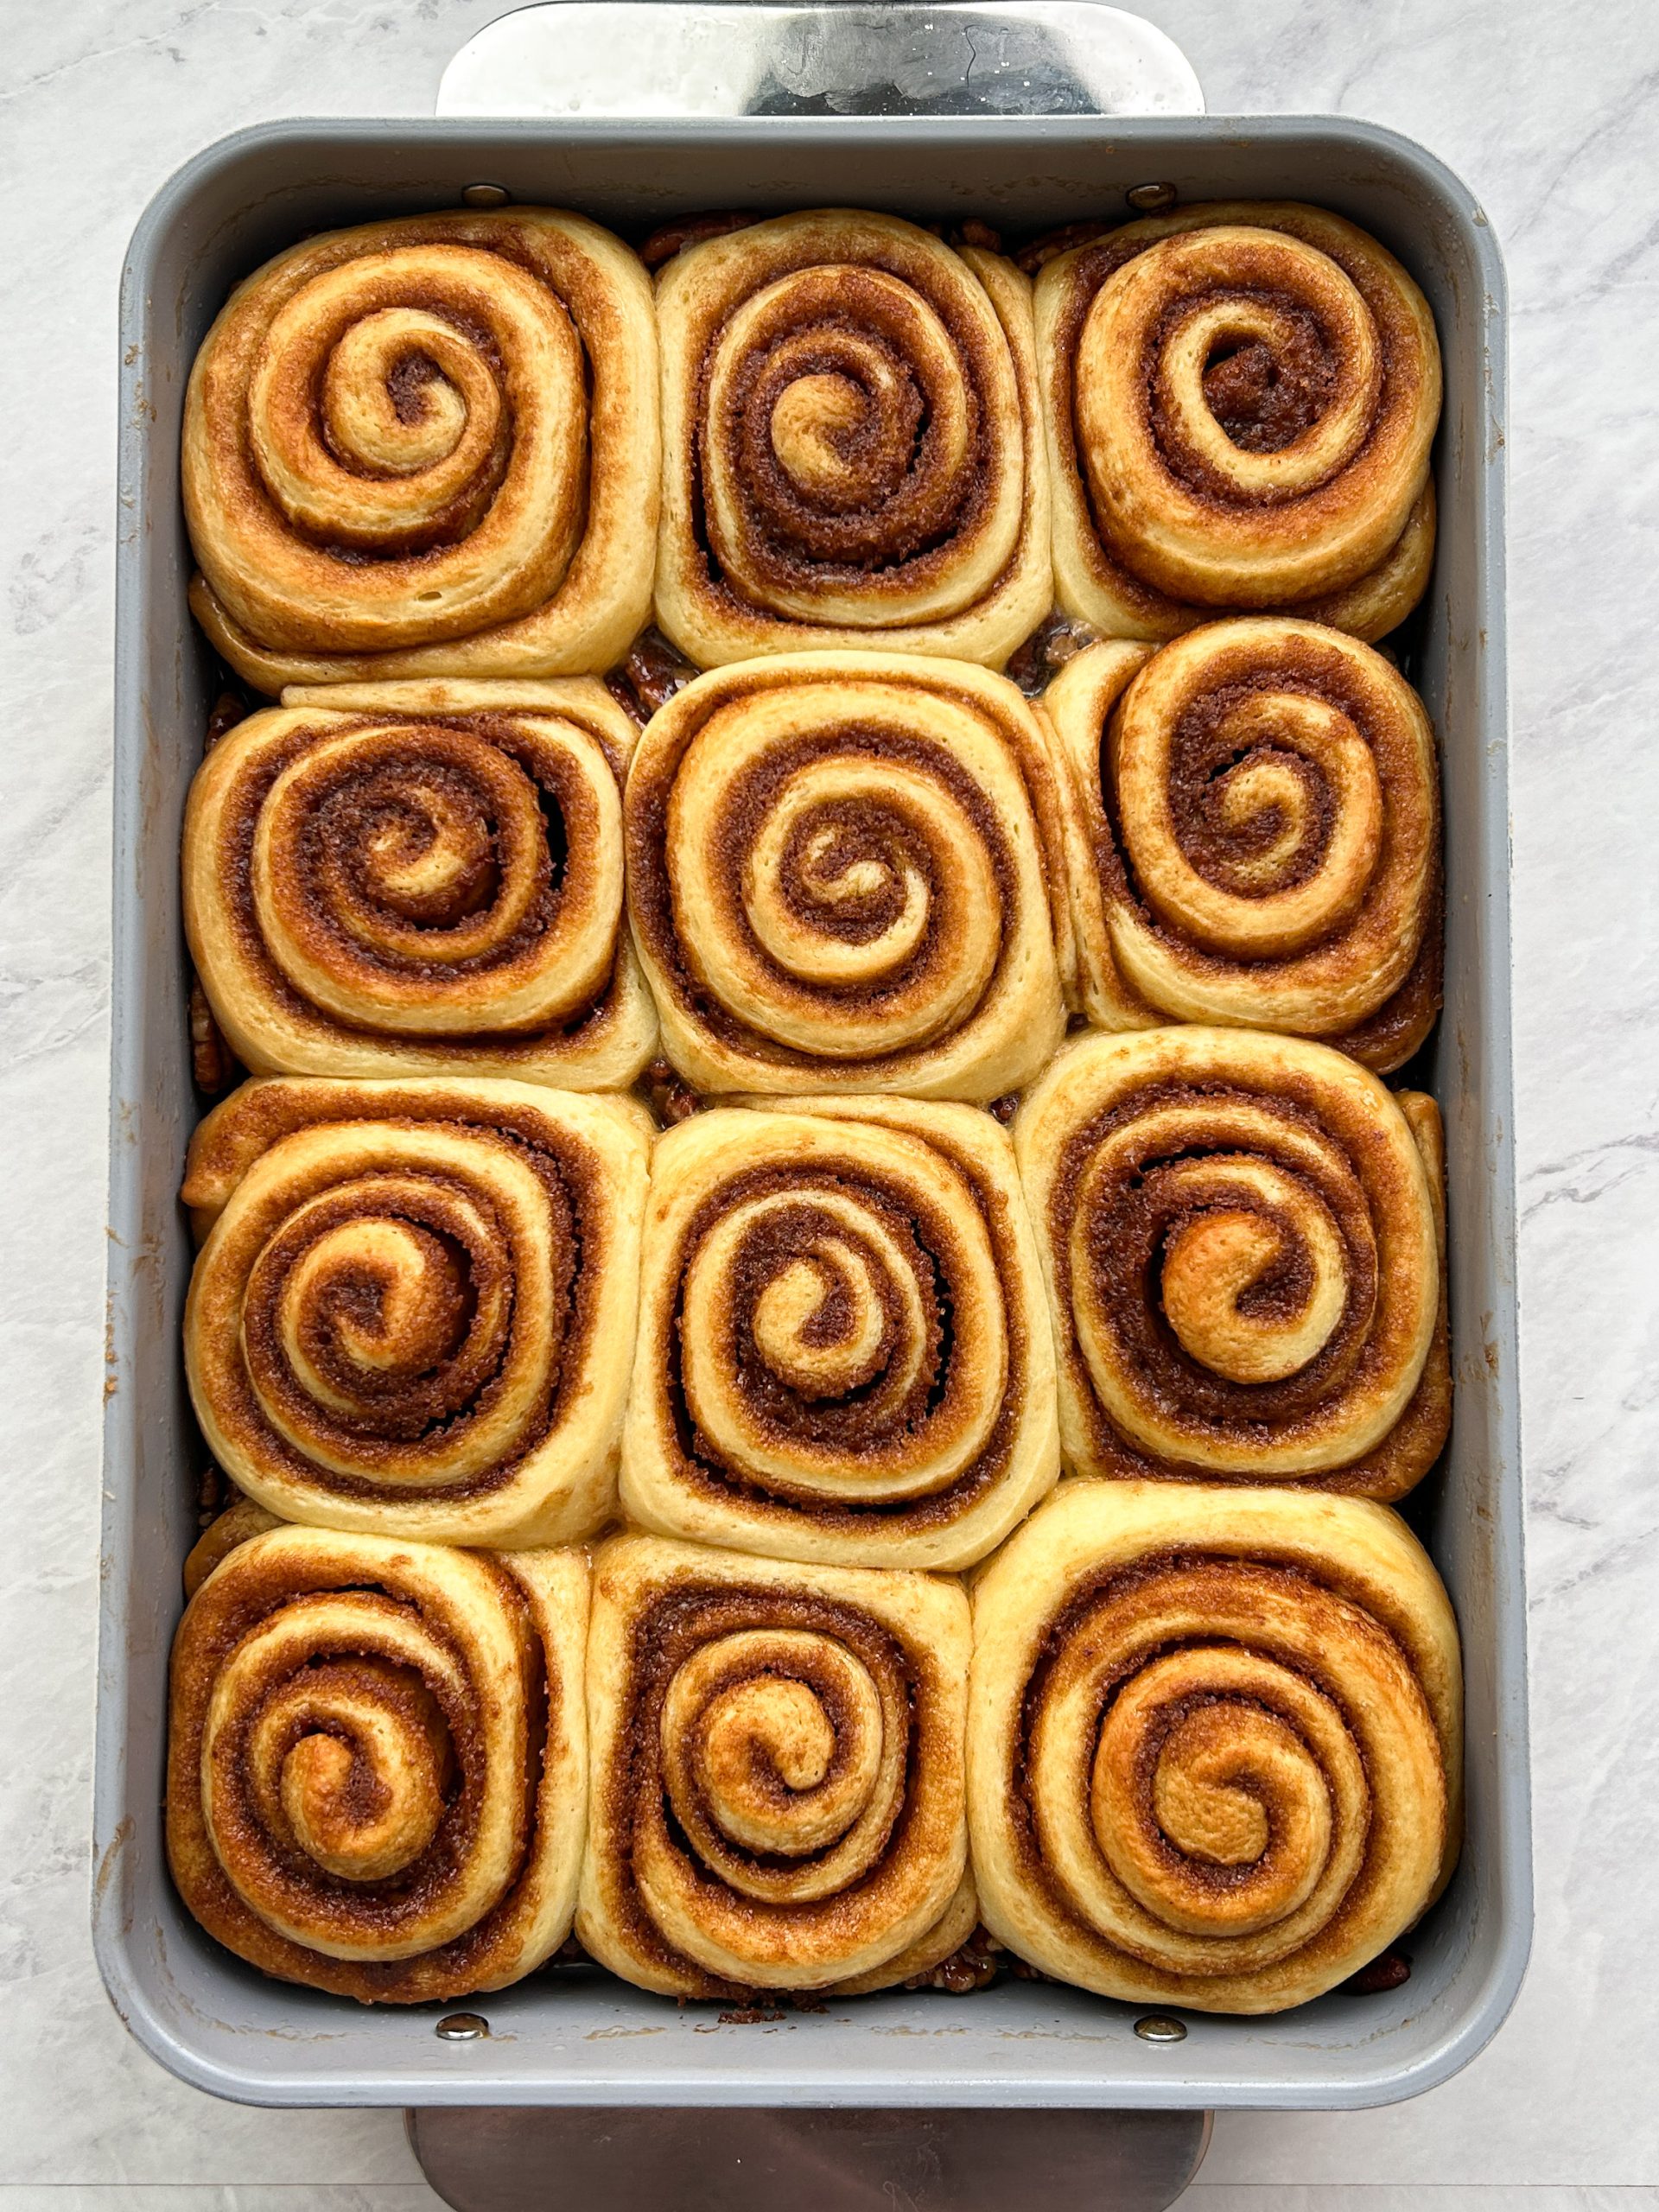 12 cinnamon rolls shaped and placed on top of sticky pecan filling in a 9x13 baking dish. they have been baked and now fill up the tray with swirls of cinnamon sugar seen in them